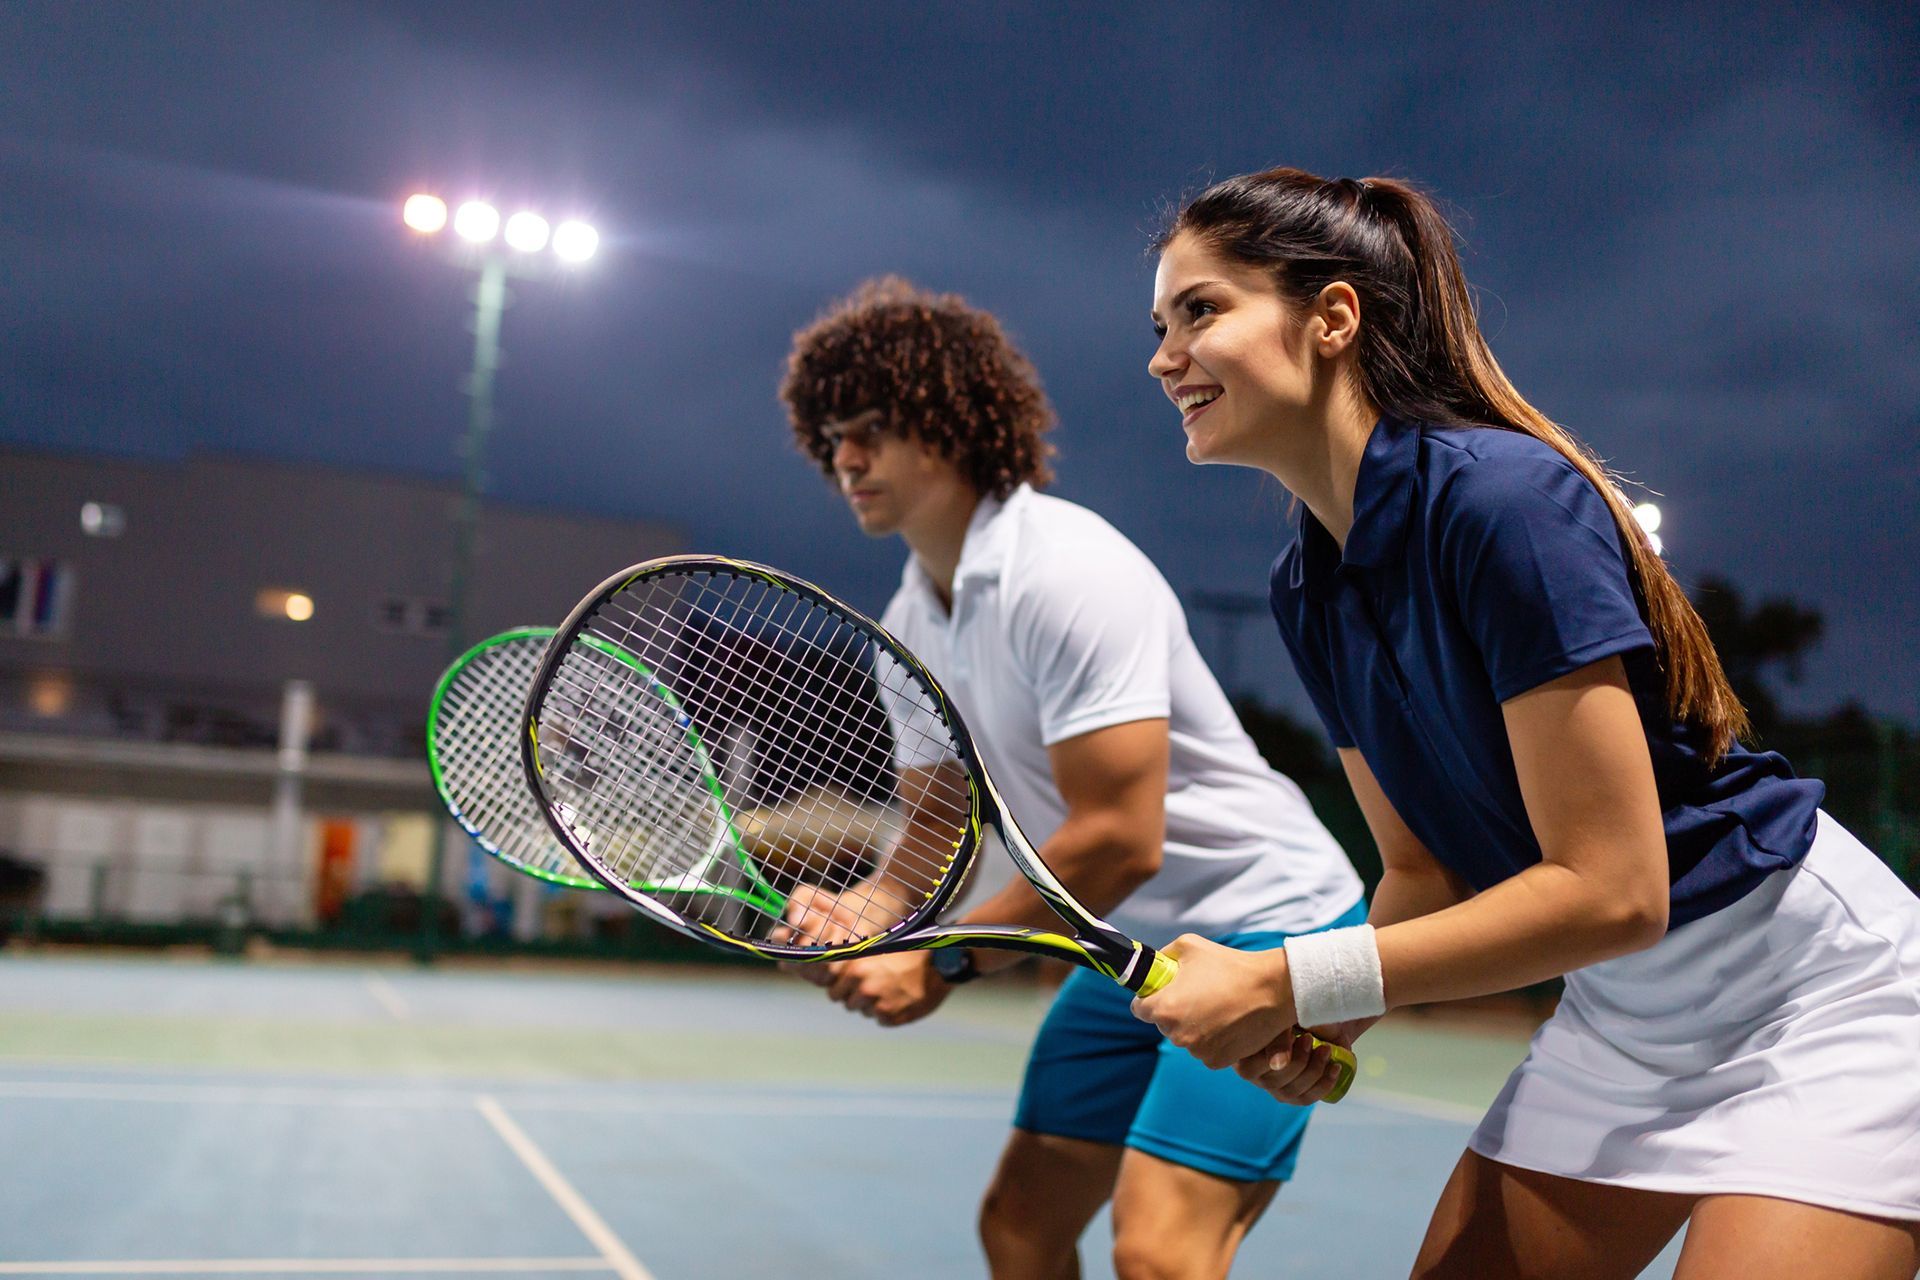 a man and a woman are playing tennis on a tennis court at night.